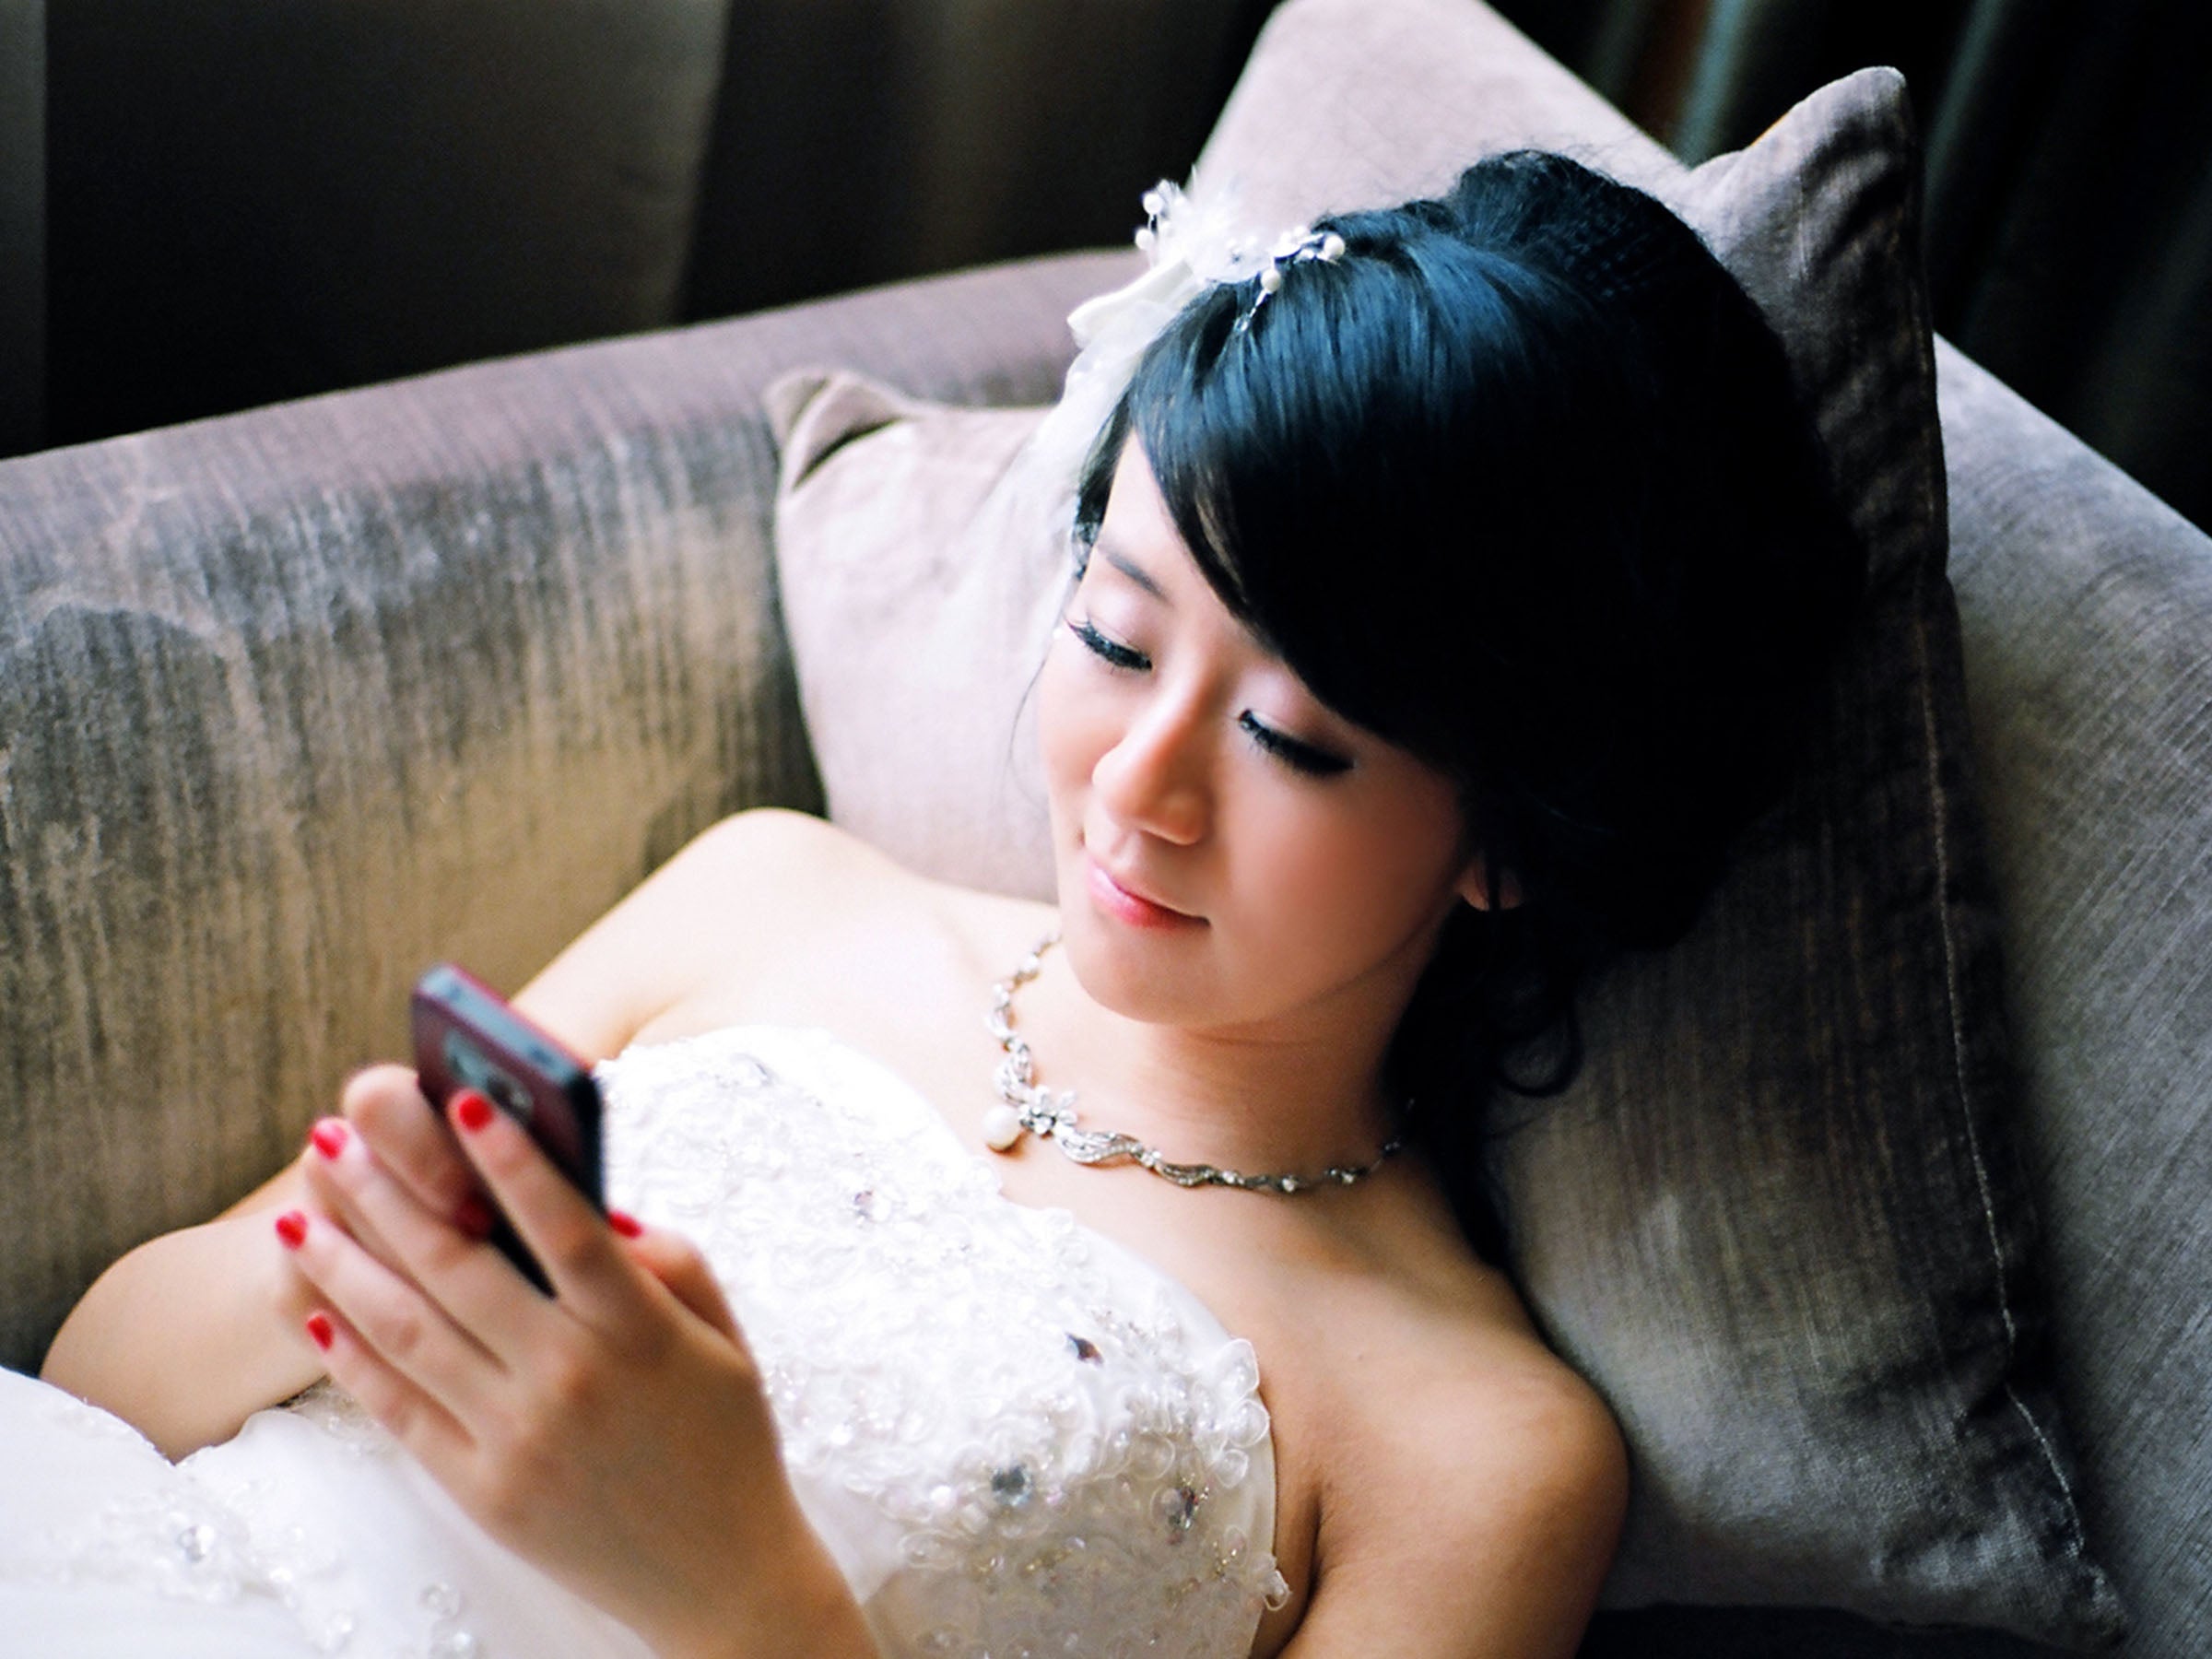 Groom divorces bride after she was too busy texting to have sex on their wedding night The Independent The Independent pic